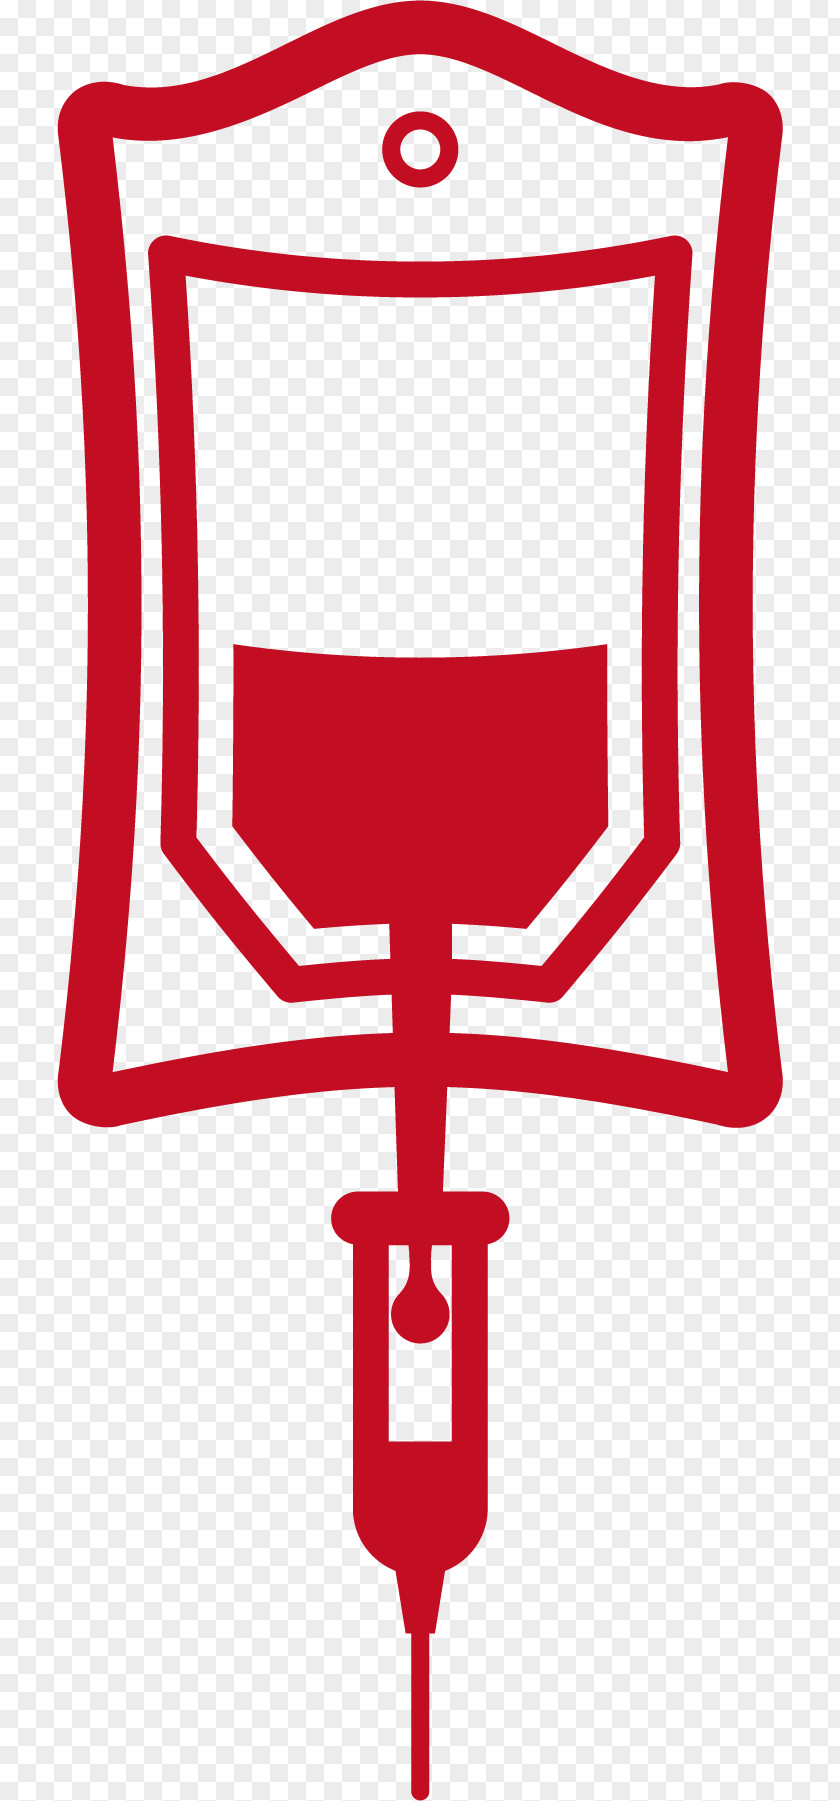 Red Blood Bag Intravenous Therapy Chemotherapy Infusion Pump Icon PNG